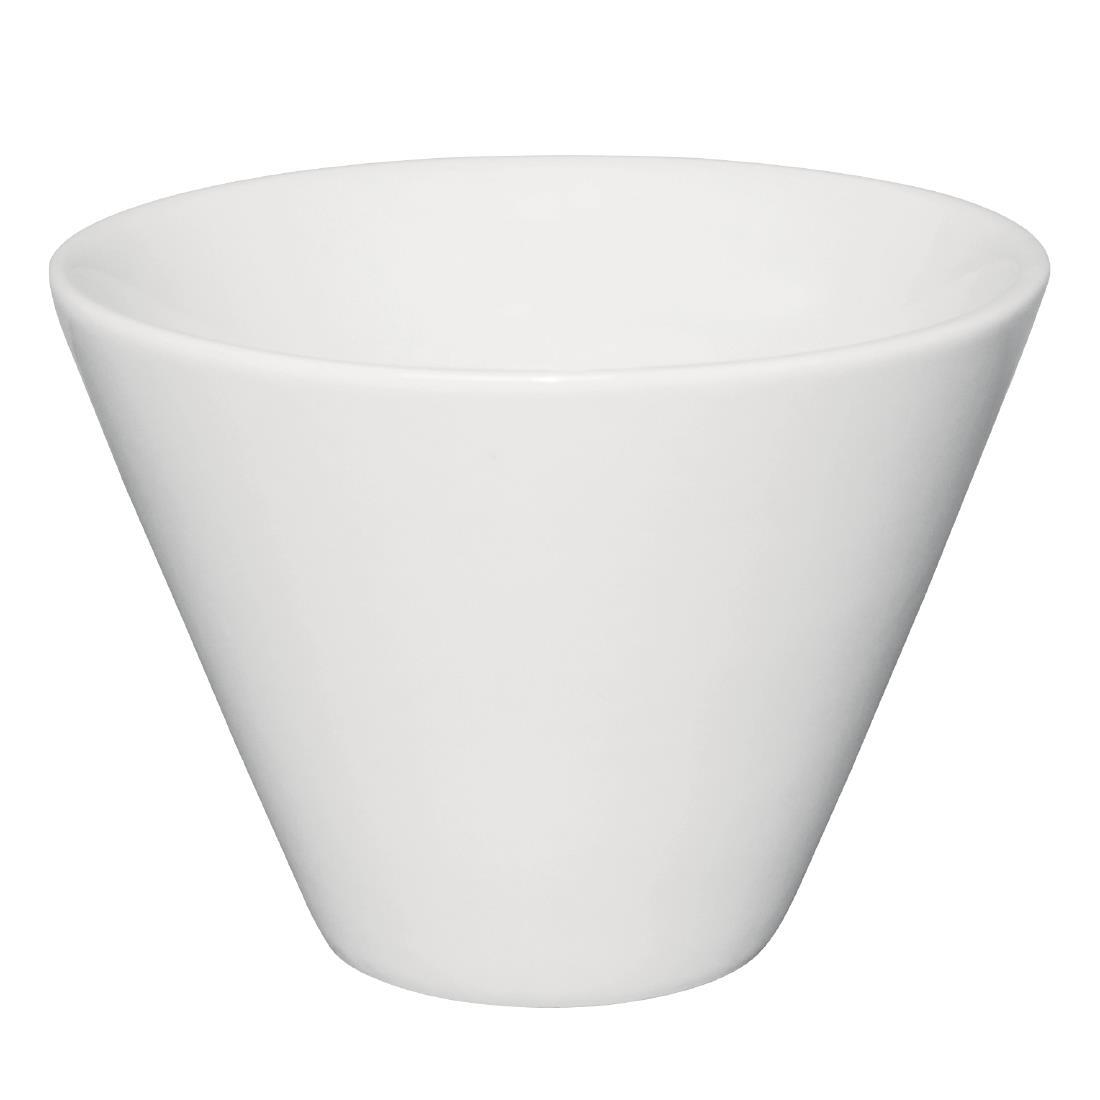 Olympia Conical Ramekin White 70mm (Pack of 12) - CM164  - 2